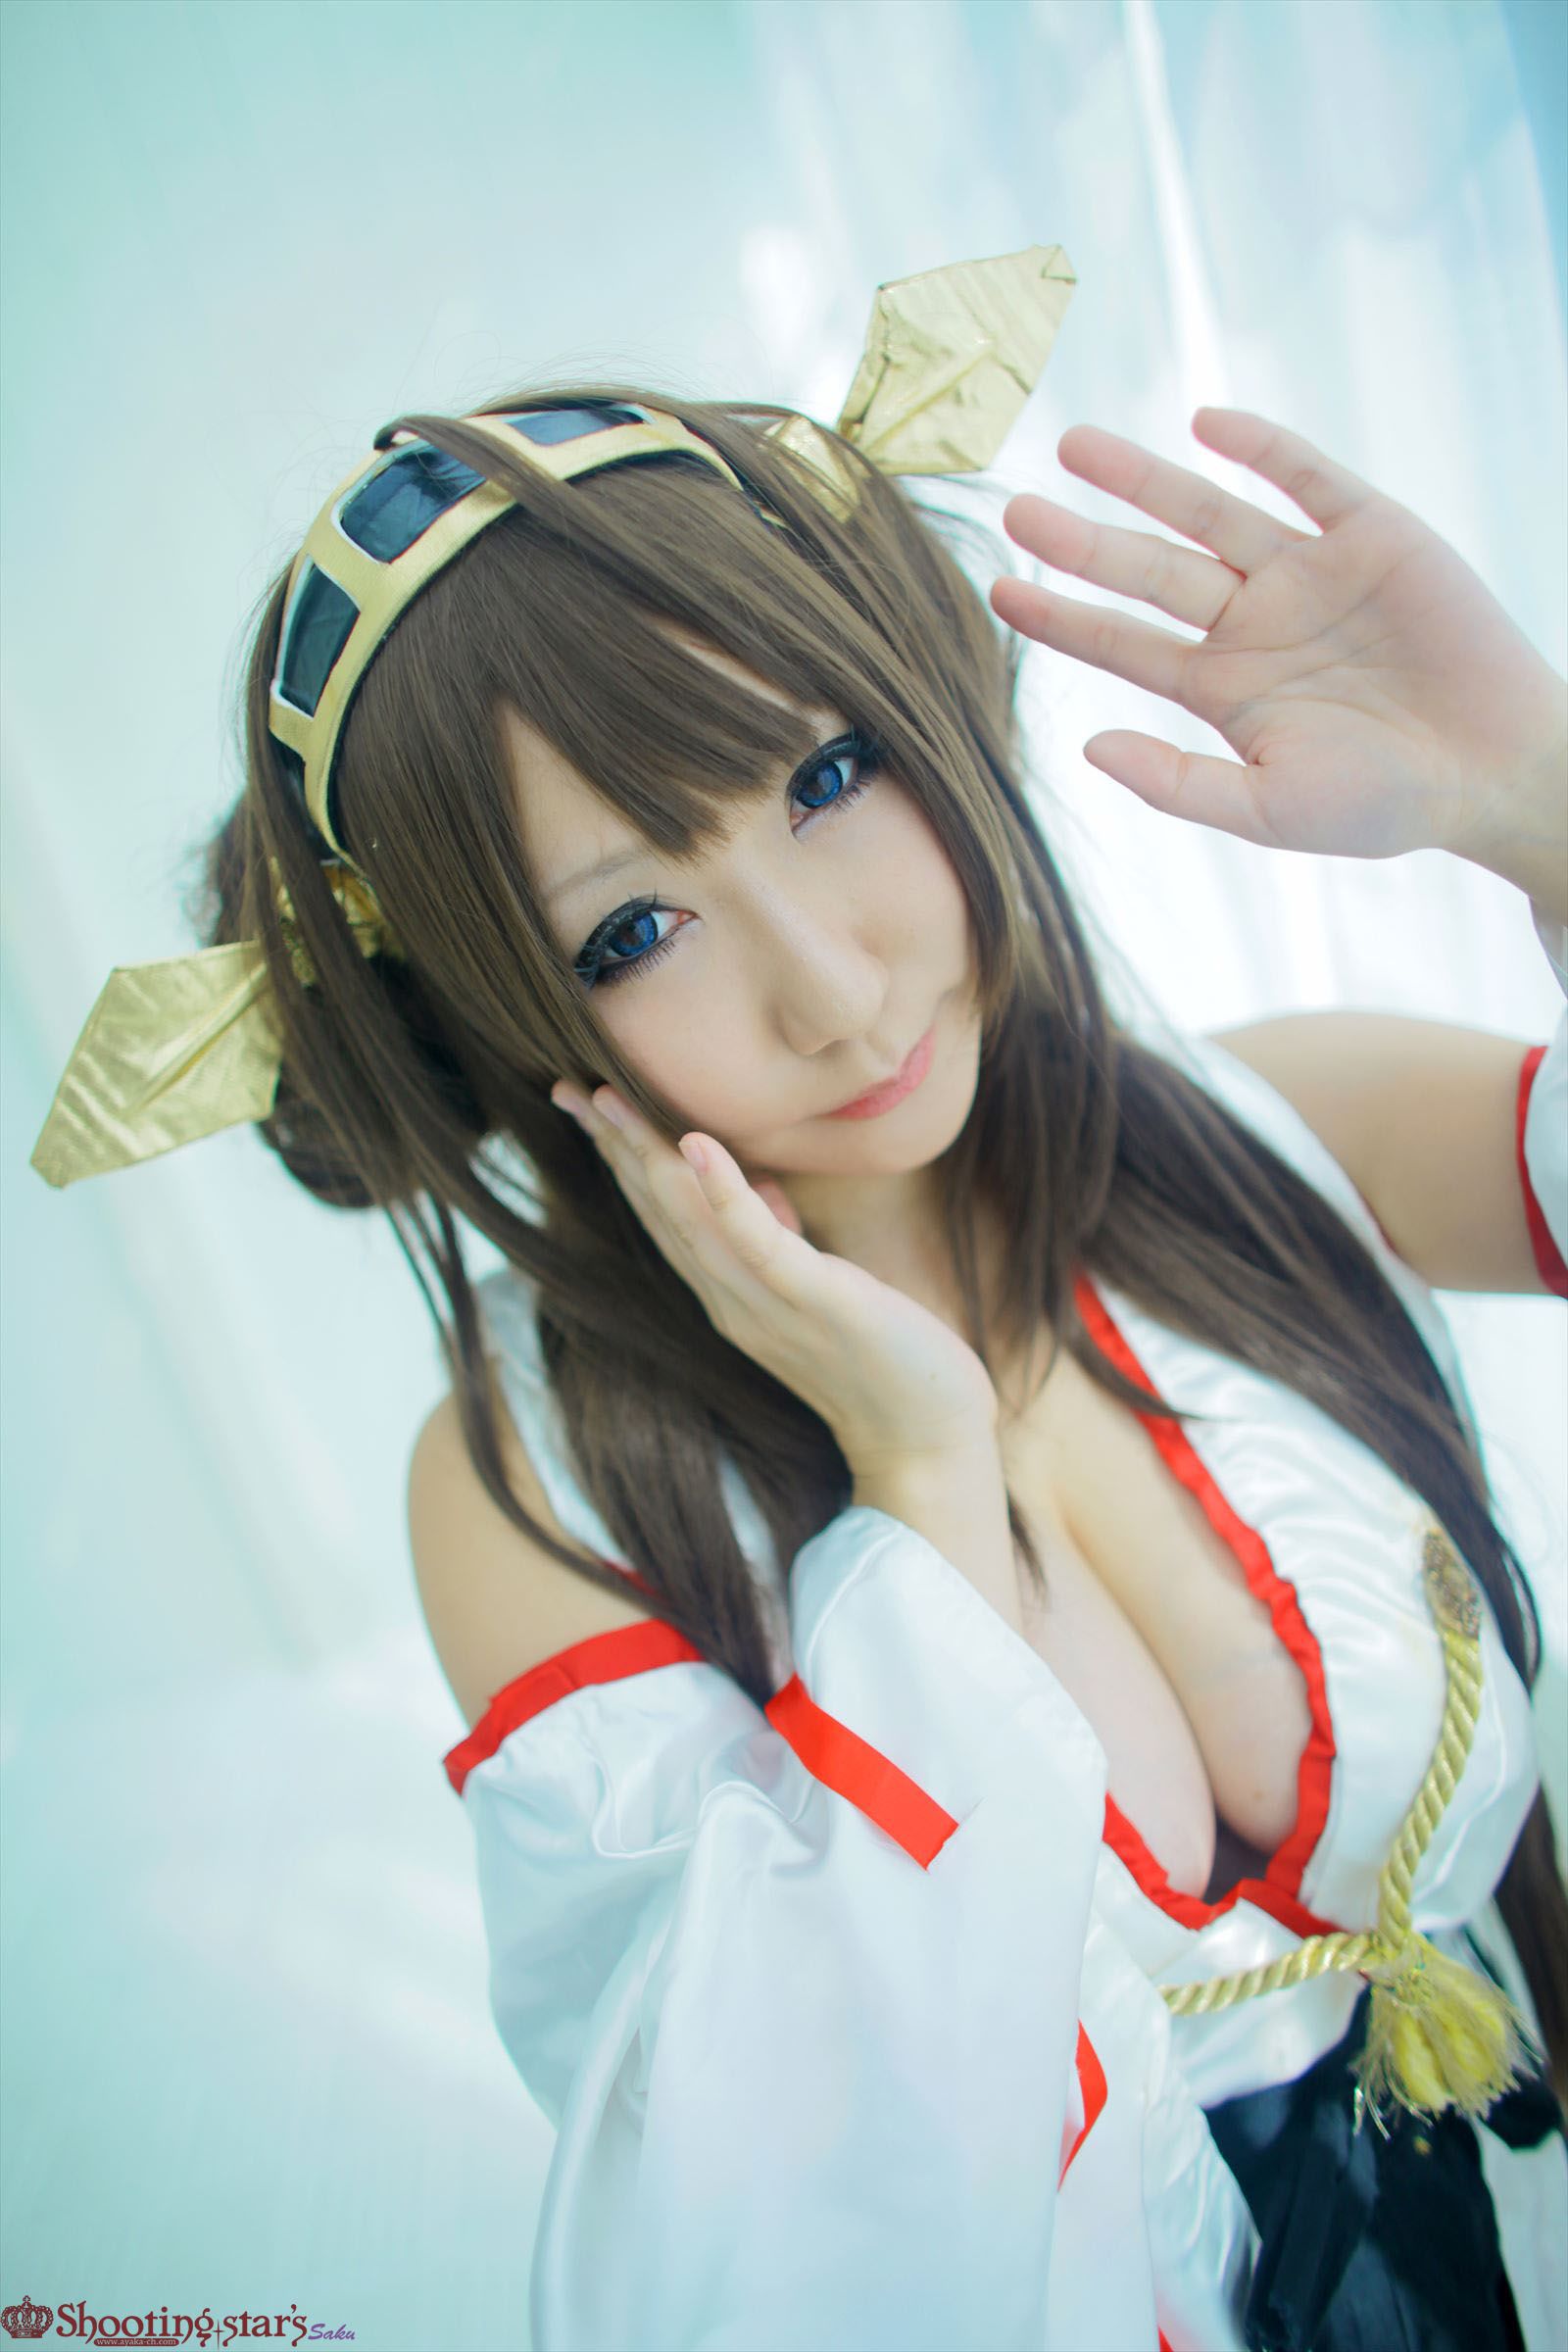 [Cospley] Sexy Kongou from Kantai Collection under the water 之清新养眼系列[89P]